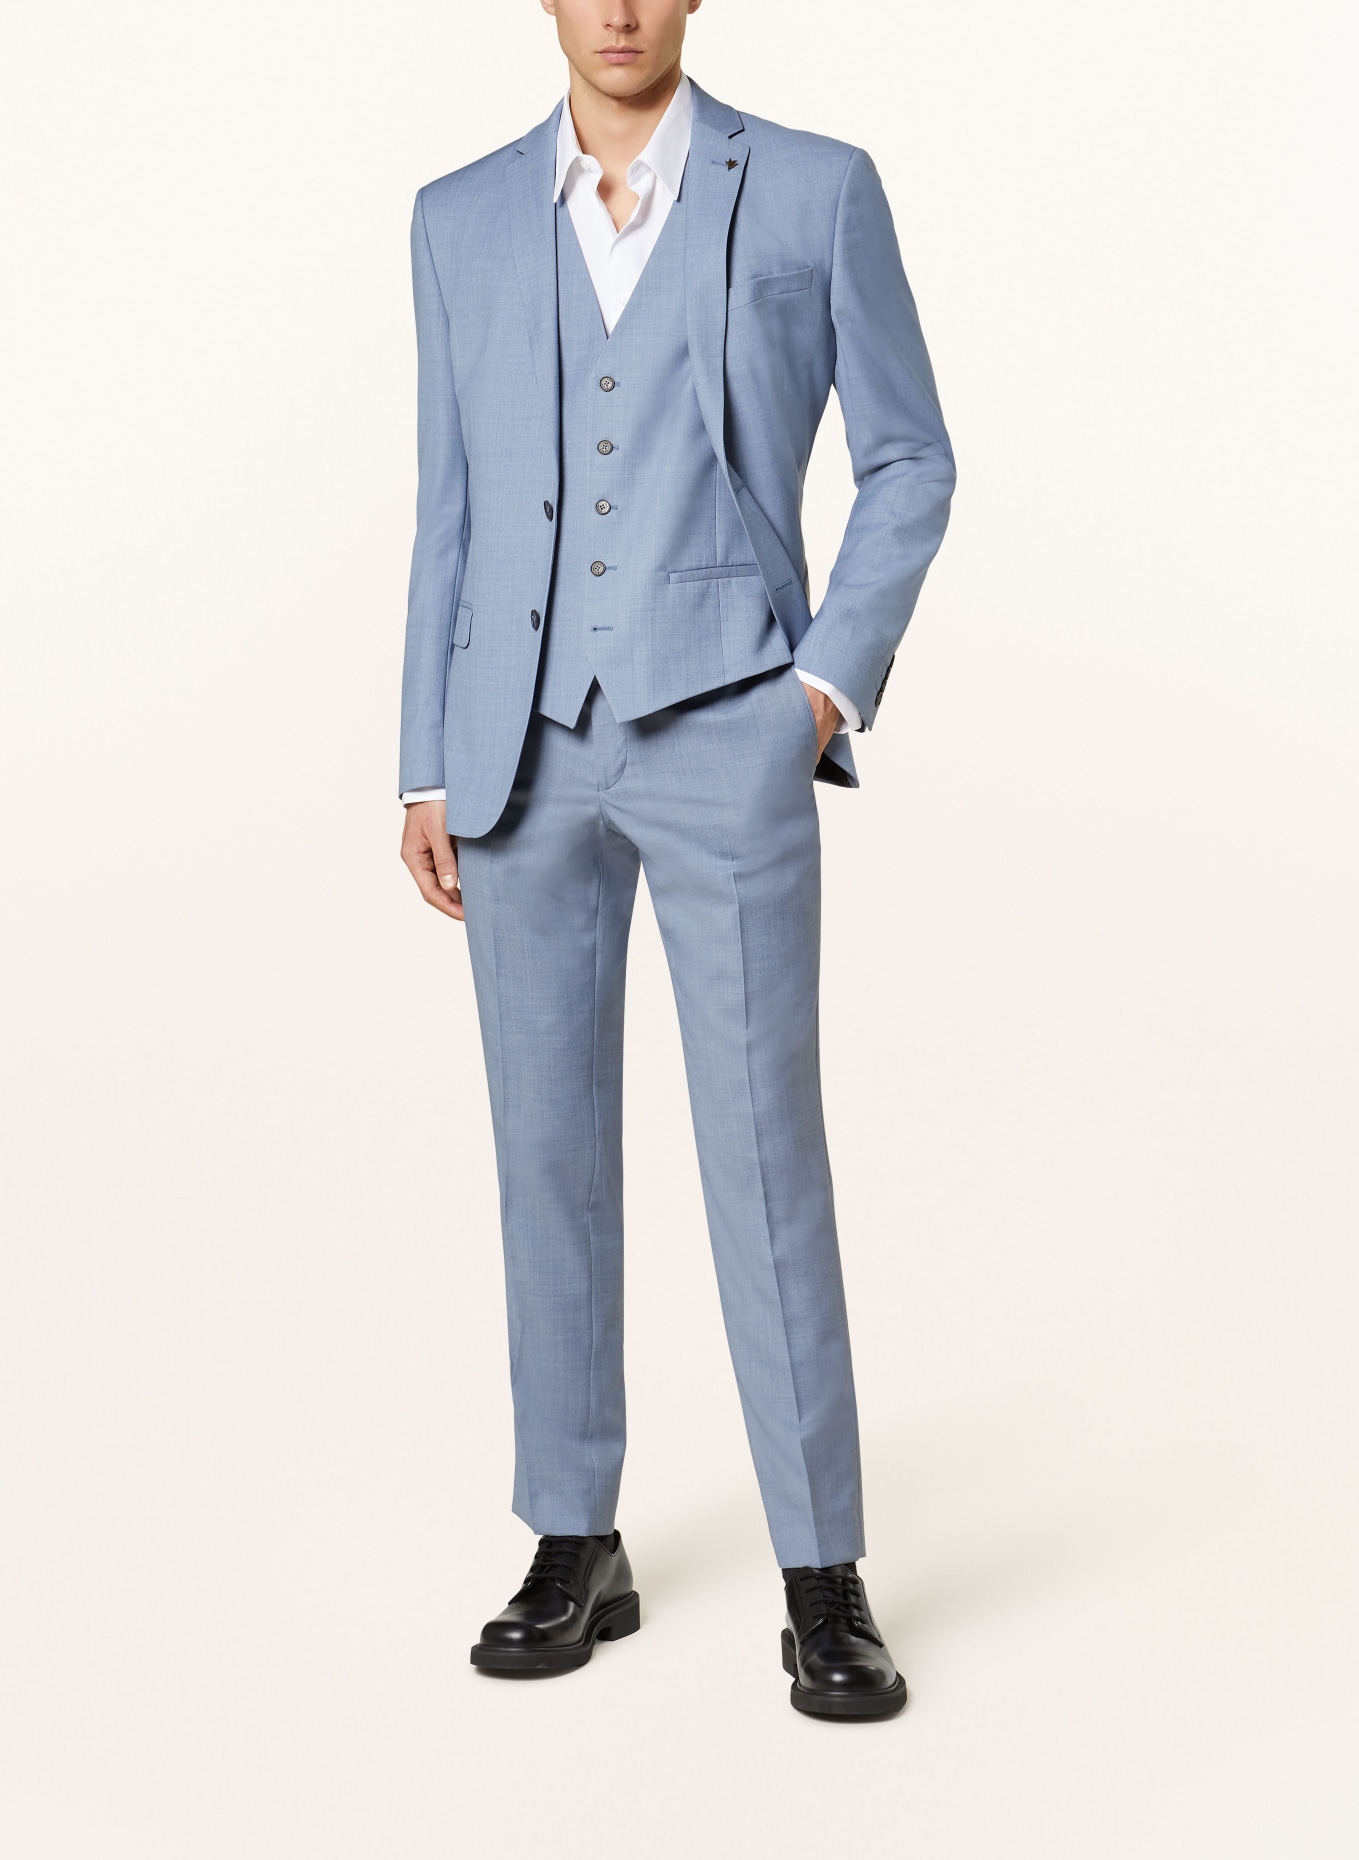 TED BAKER Anzughose ORIONT Slim Fit, Farbe: BLUE BLUE (Bild 2)